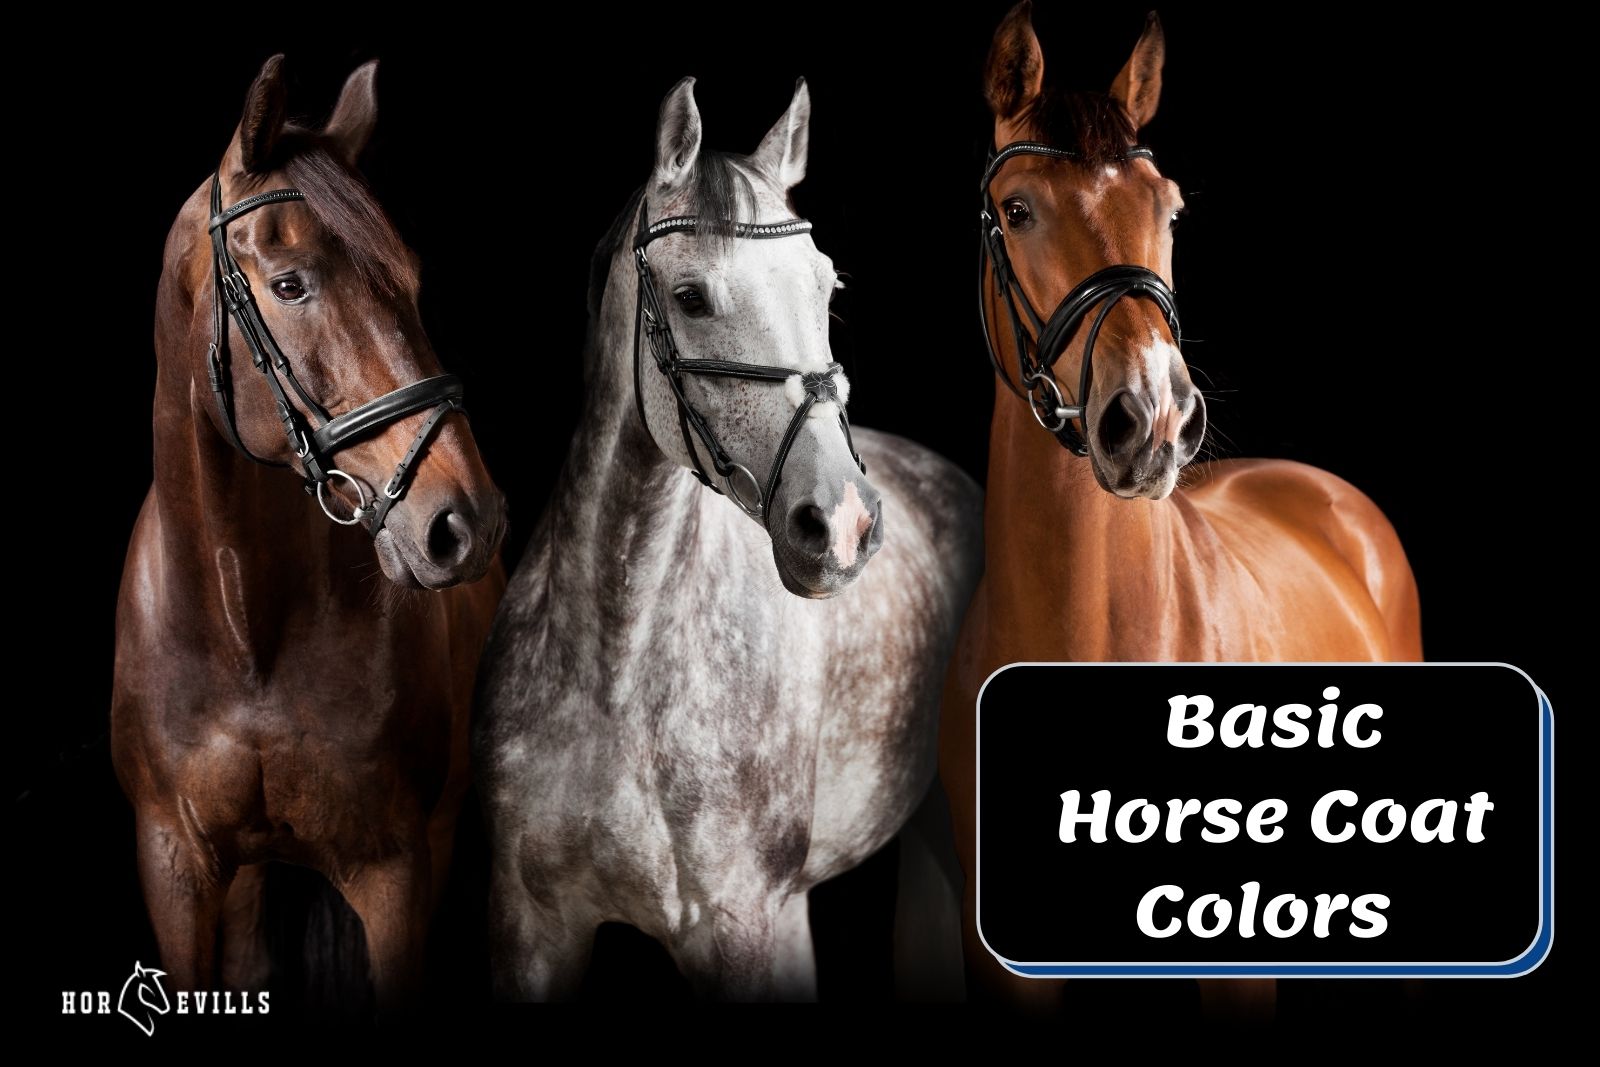 3 stallions showing what are the basic horse coat colors